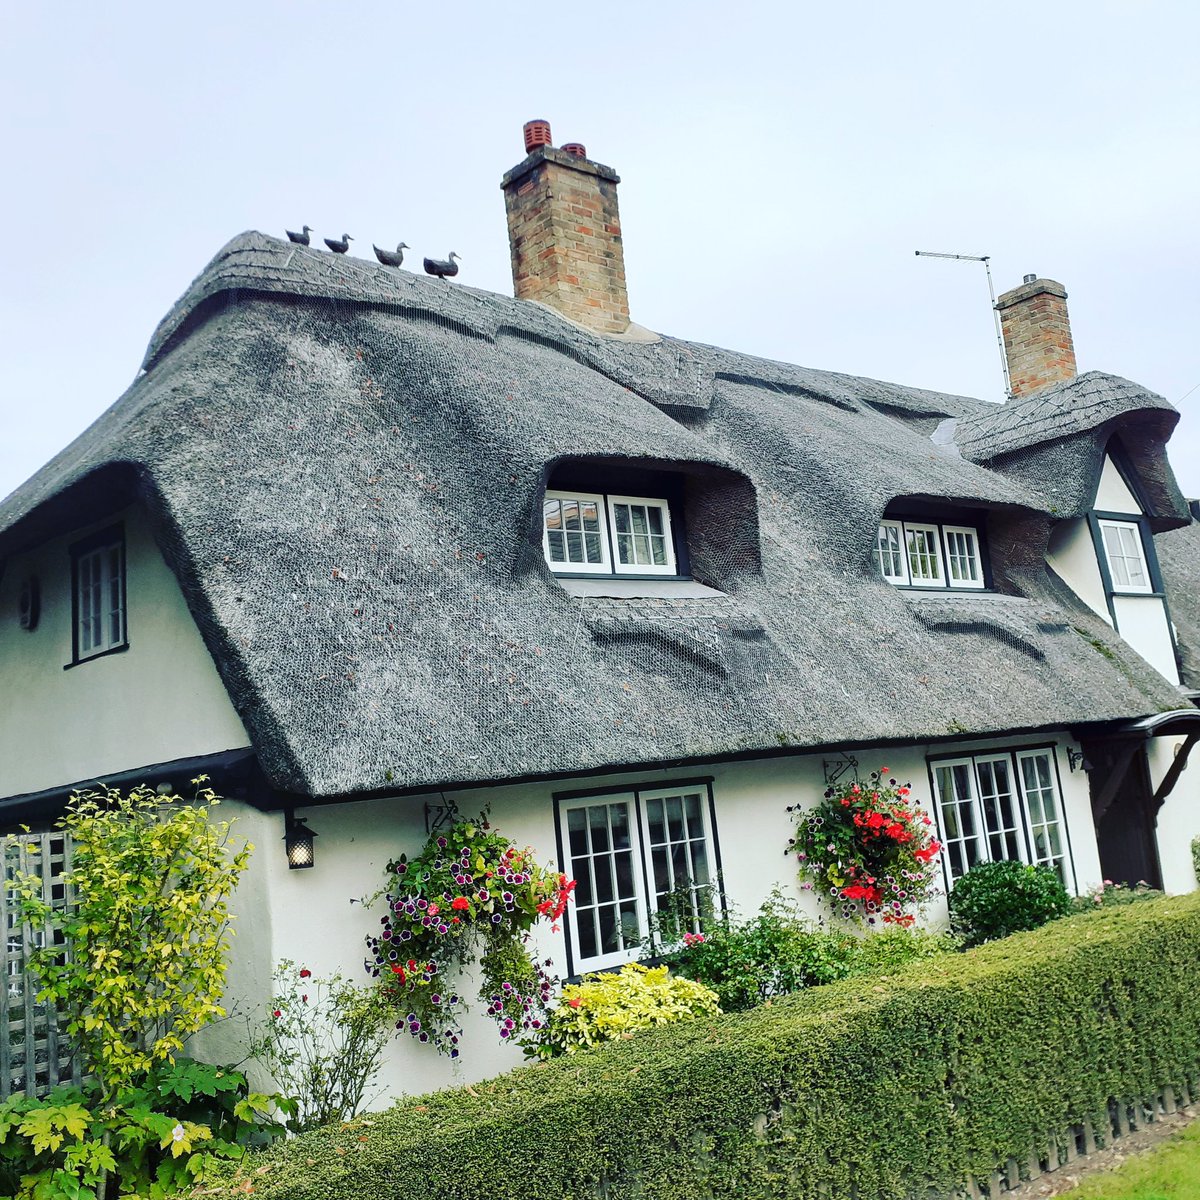 Pass this lovely cottage every day. Rare to see a thatch with ducks.
#visitengland #visitbritain #photosofbritain #lovegreatbritain #loveofcountryhouses #mybritain #bestukpics #topukphoto
#cottagestyle #thatchedcottages #england #house #uk #picoftheday #Photography #wfh